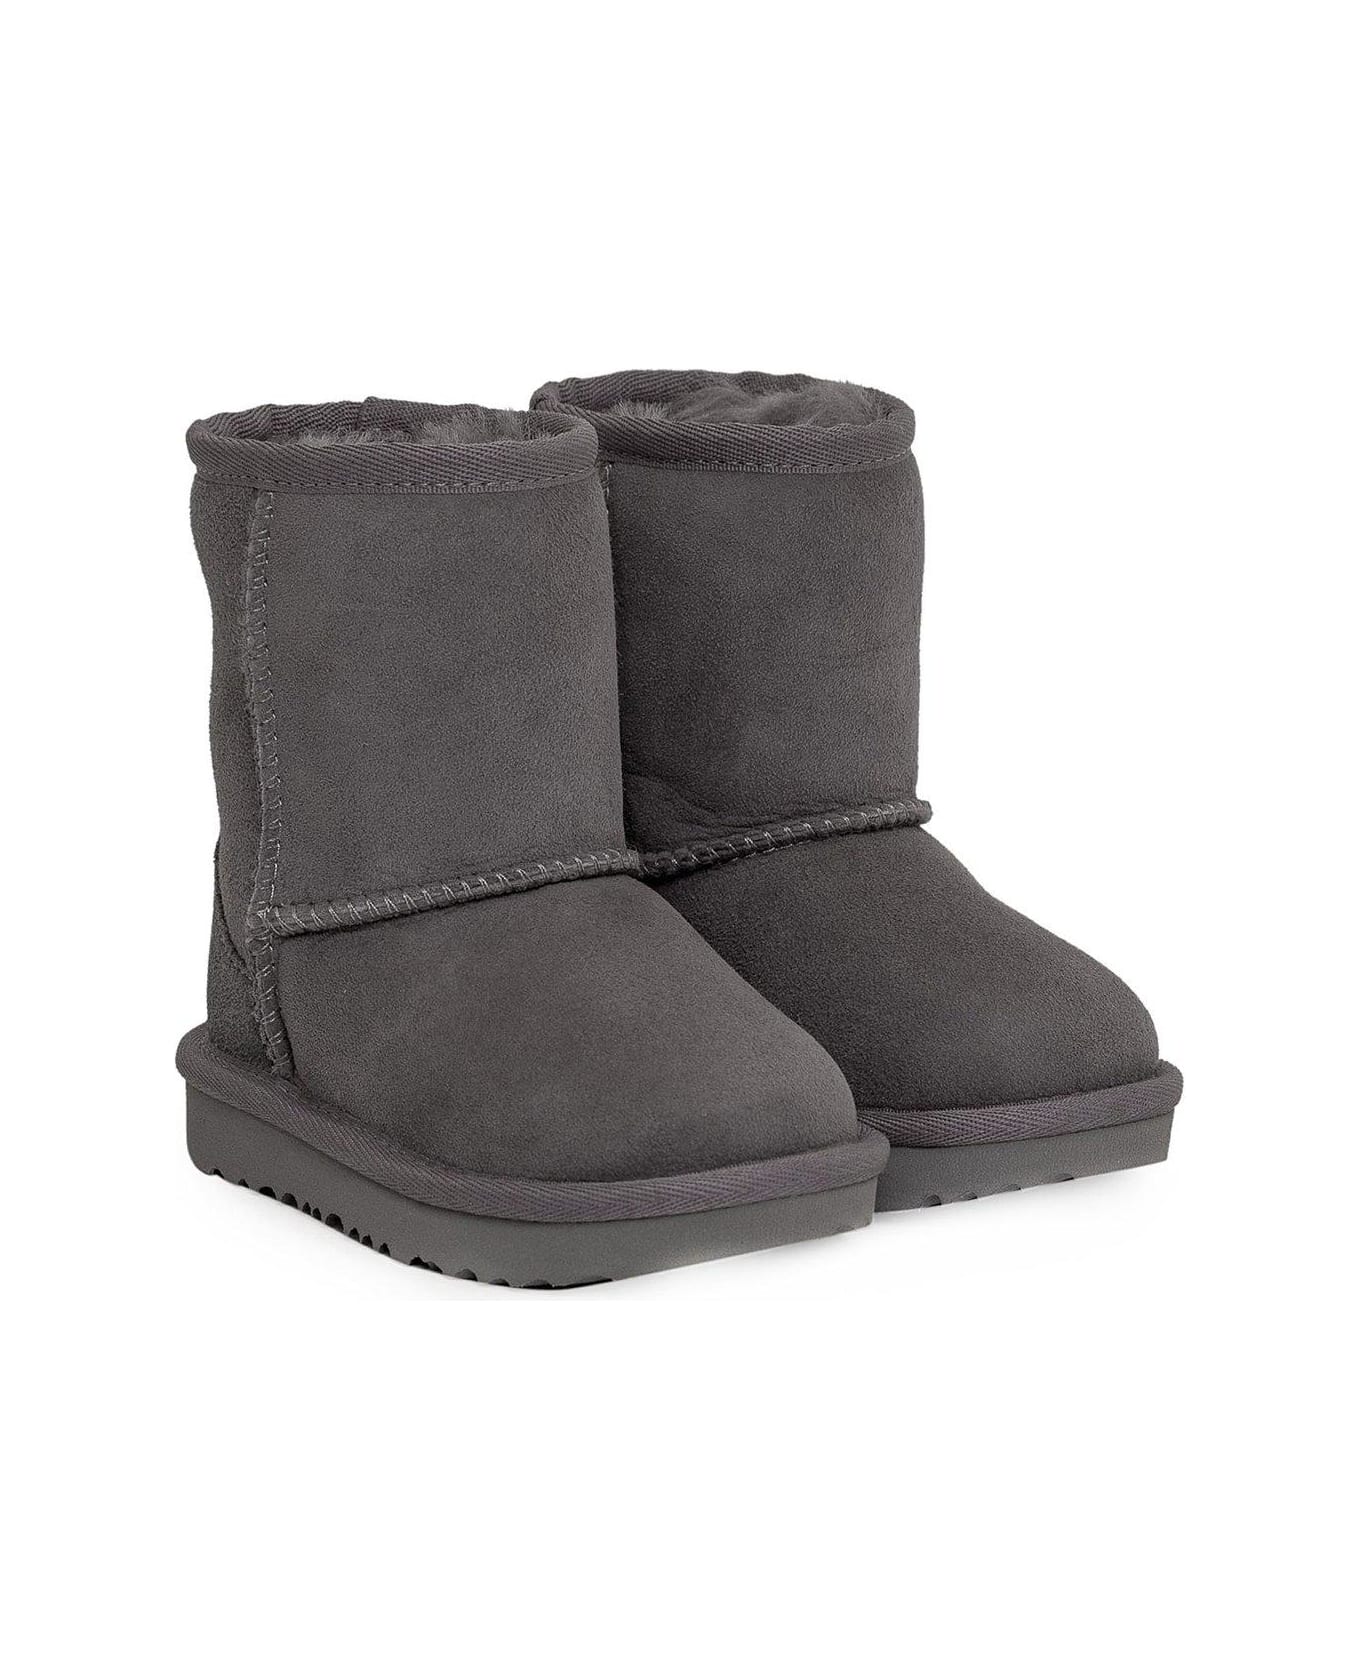 UGG Classic Ankle Boots - Grigio